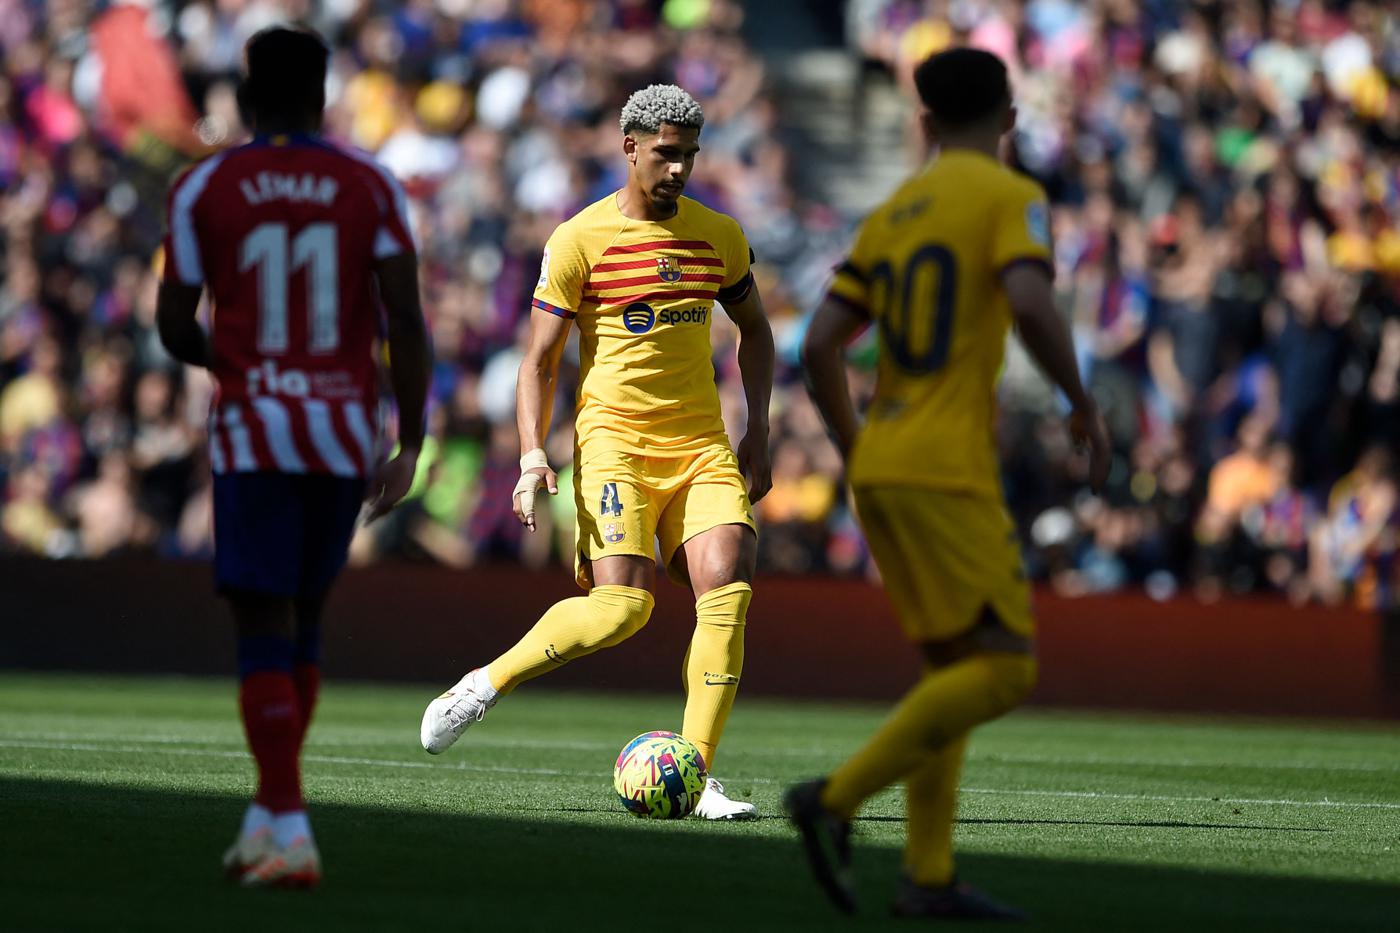 Barcelona - Atletico - 1:0. Spain Championship, round 30. Match review, statistics.